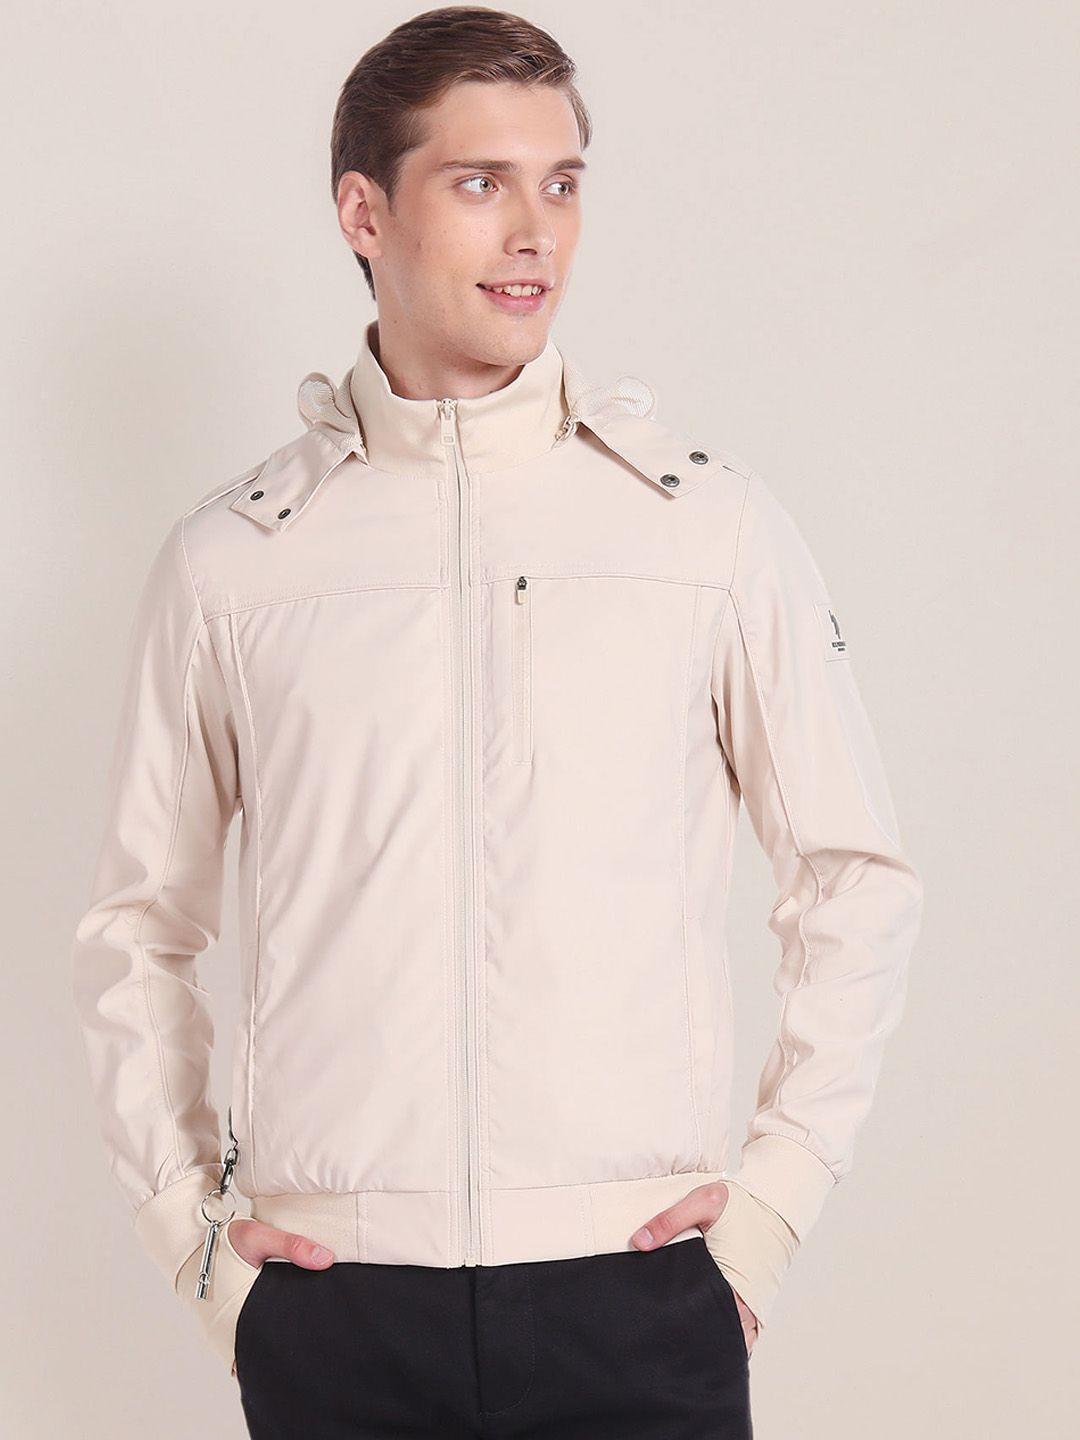 u.s. polo assn. hooded bomber jacket with detachable neck pillow